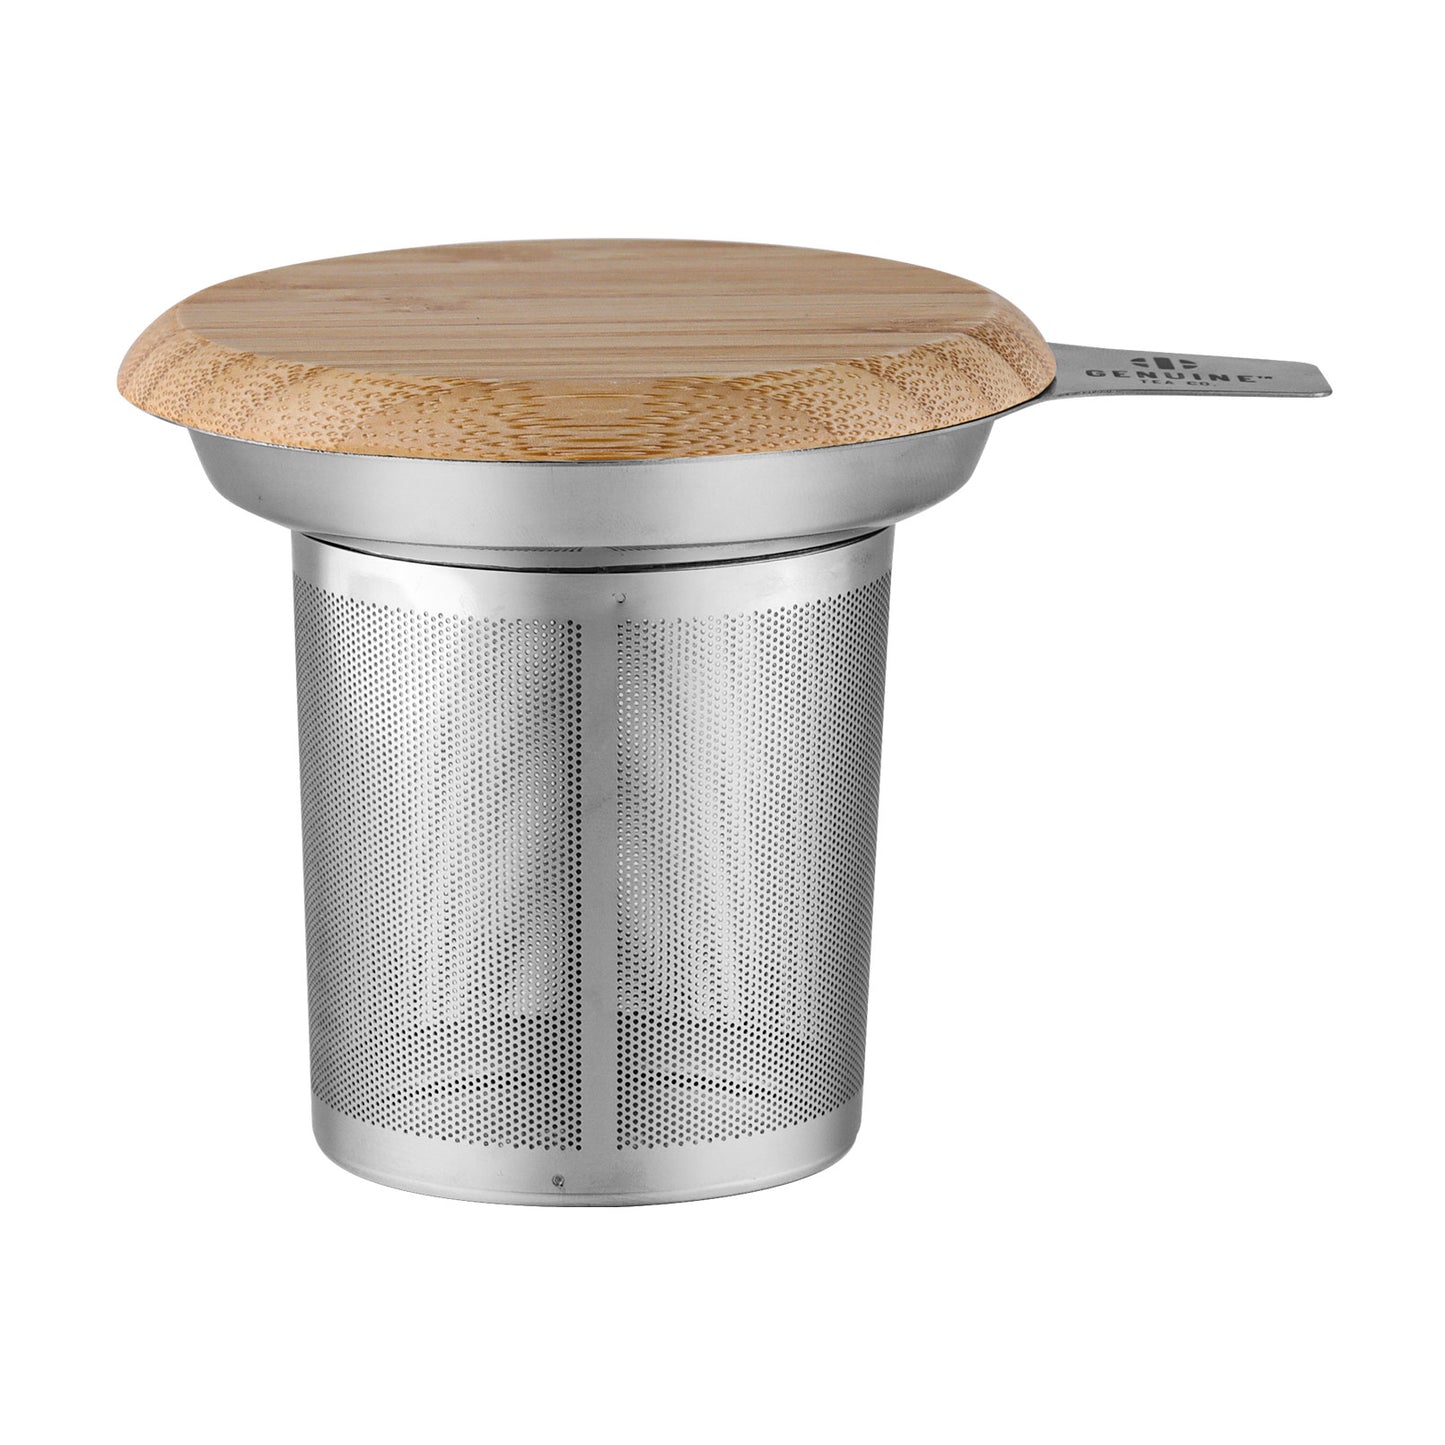 Genuine Tea Infuser with a Bamboo Lid. This Genuine Tea Infuser if perfect for steeping organic loose leaf tea.